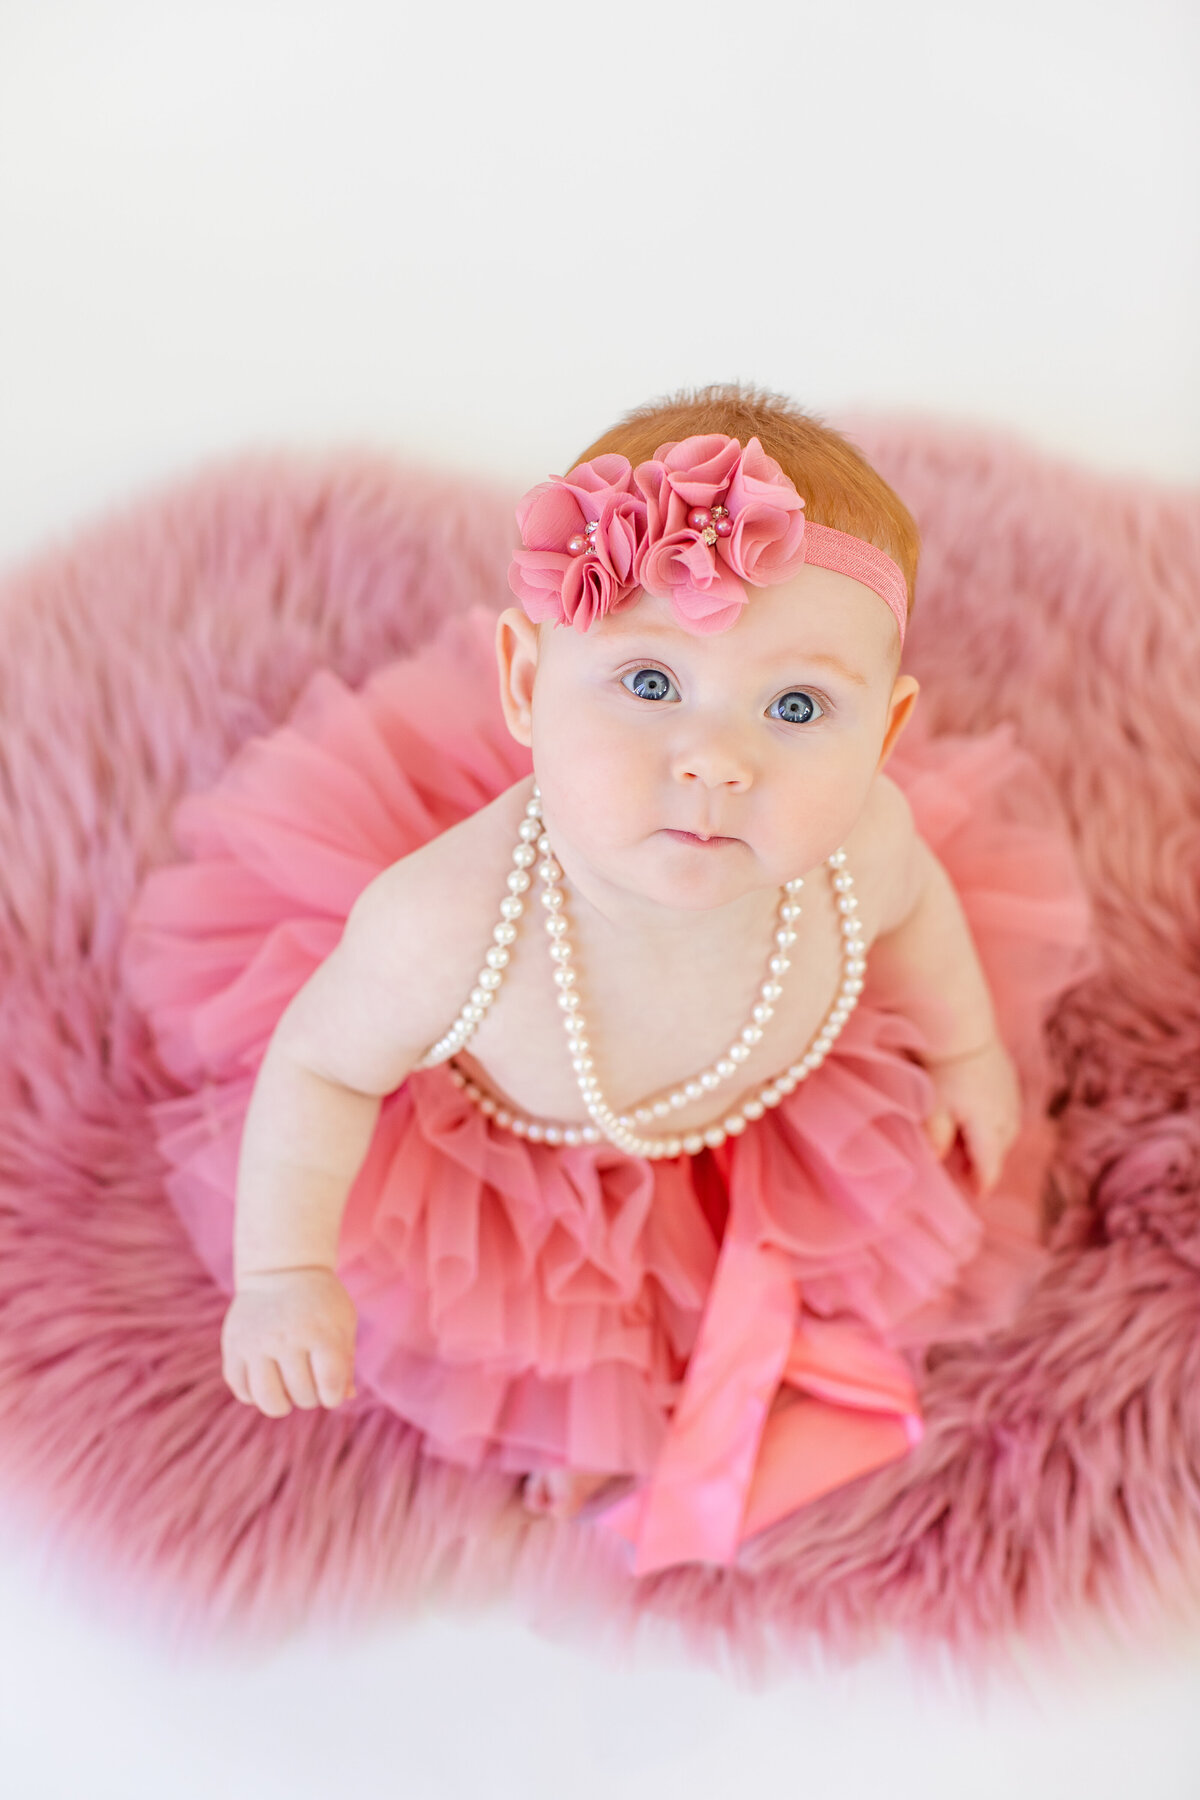 Baby girl in pink tutu and pearls looking up at camera